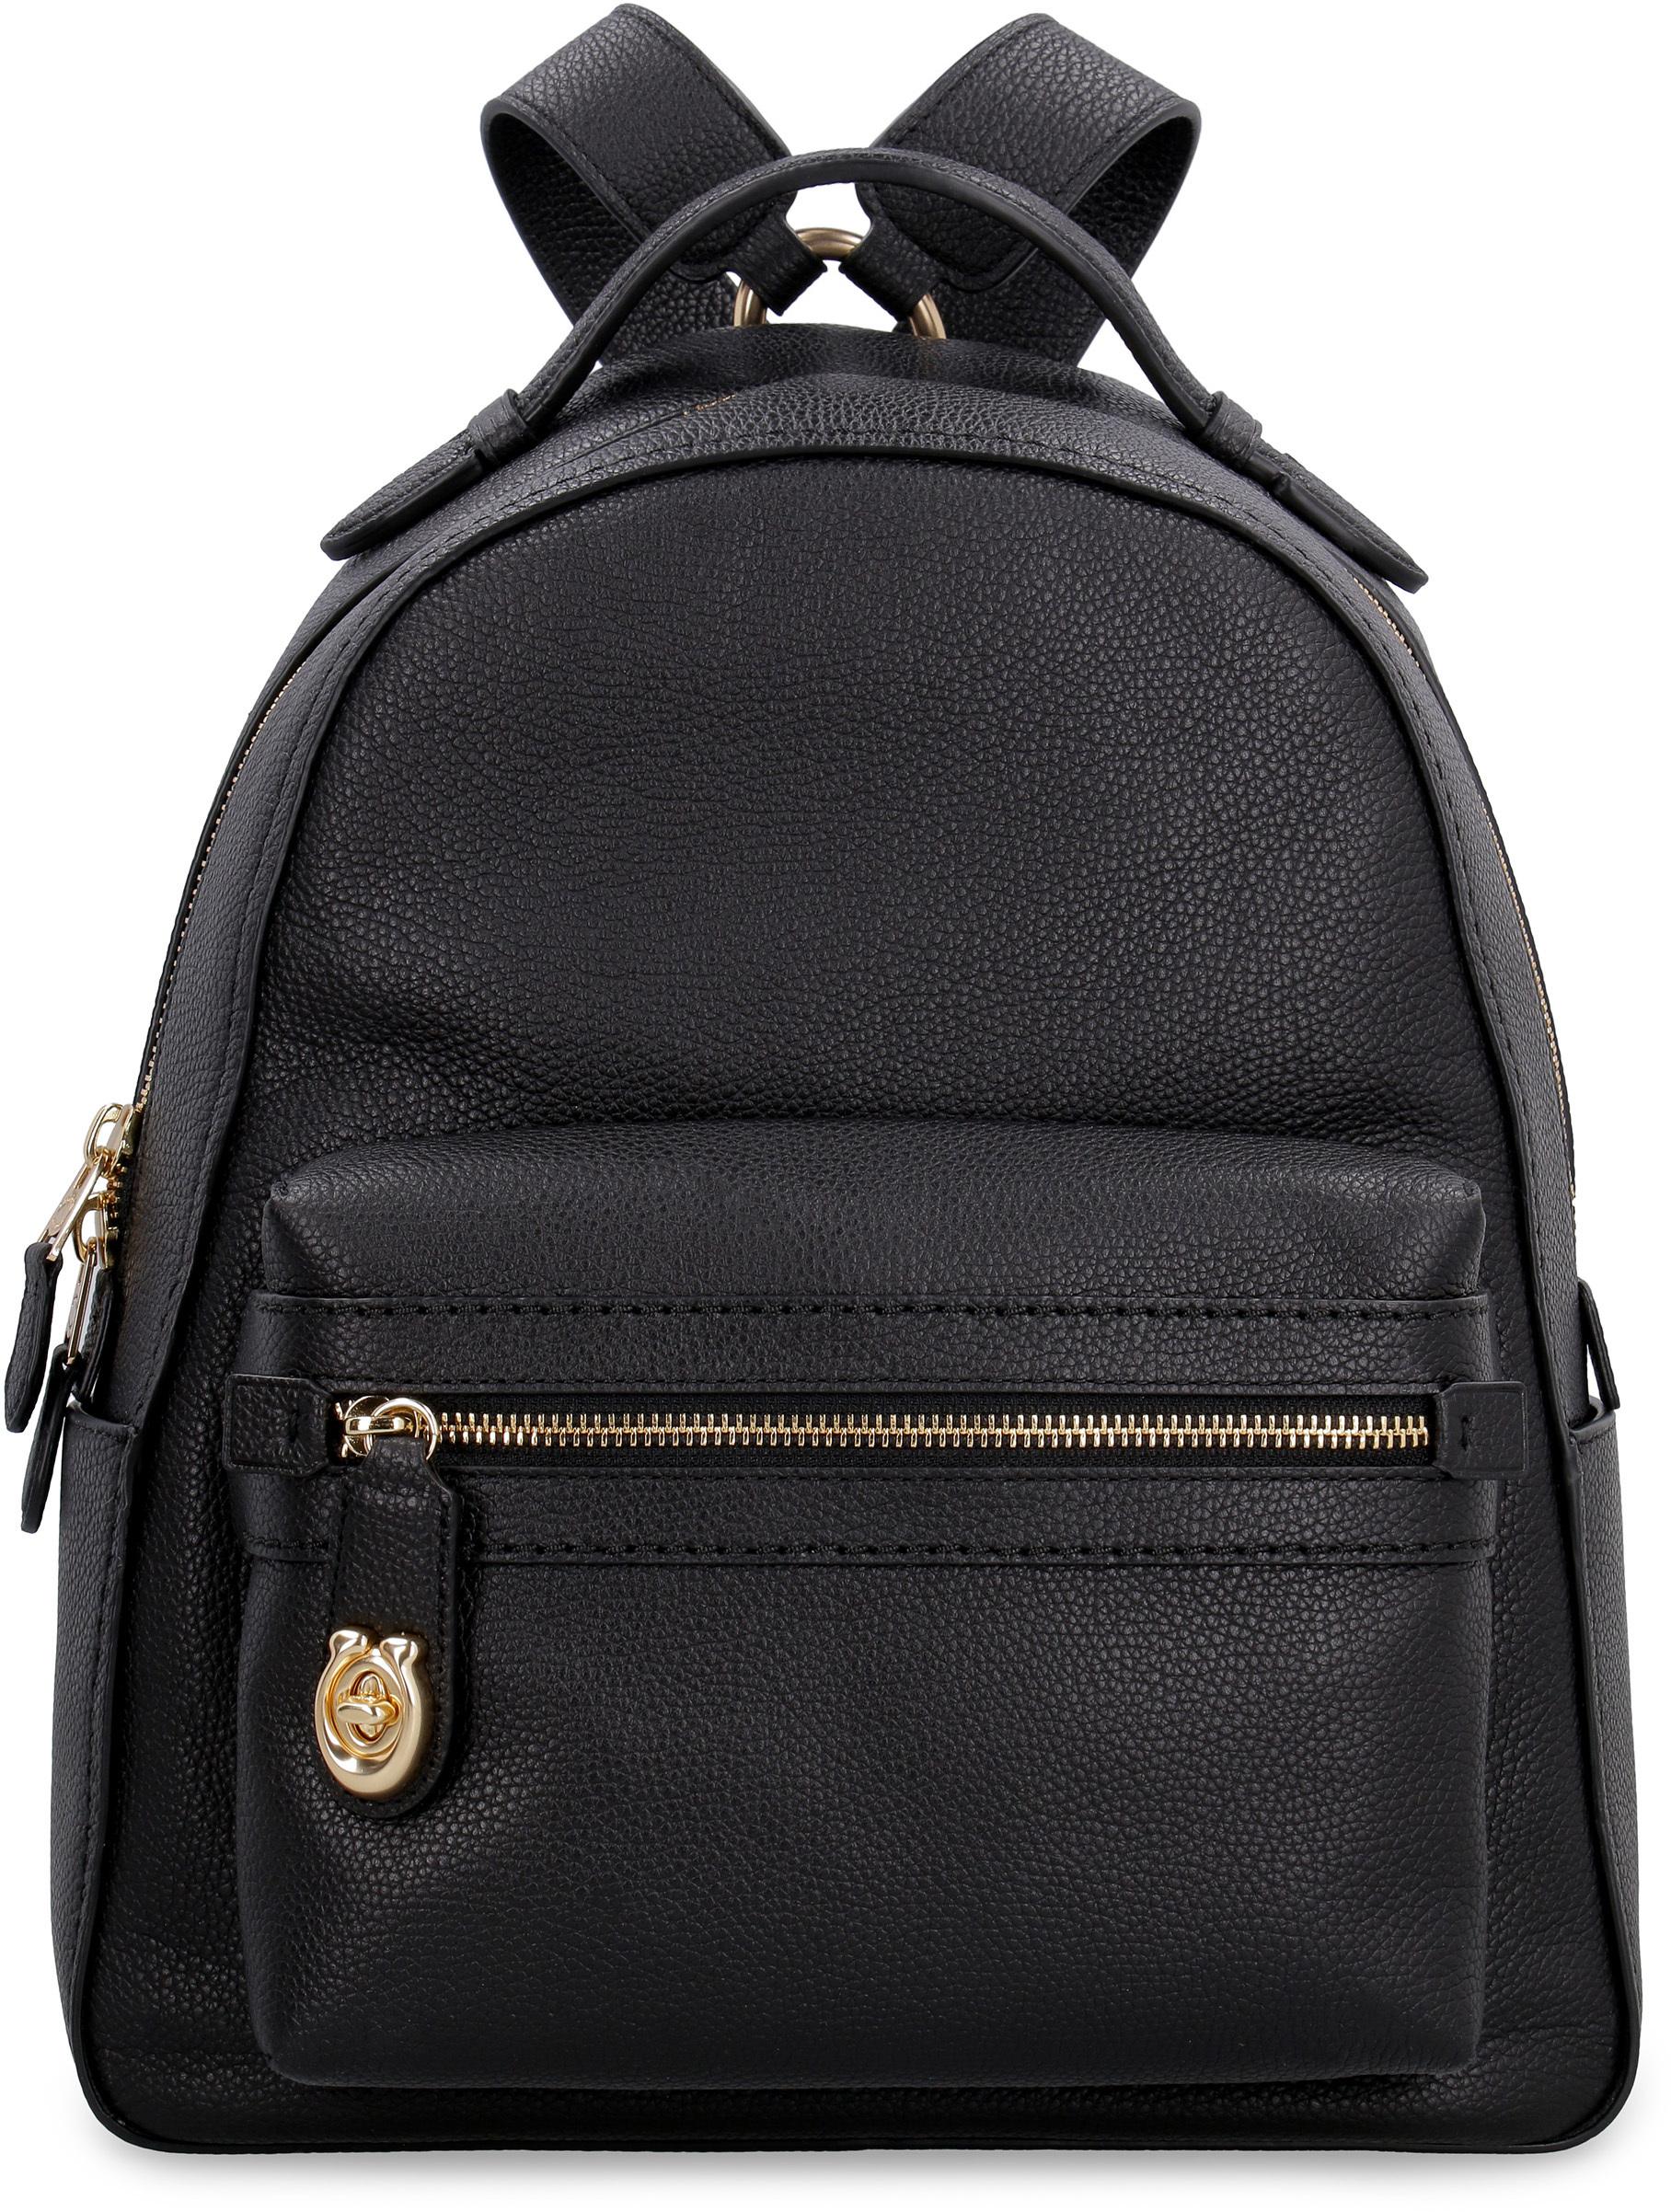 COACH Campus Leather Backpack in Black - Lyst